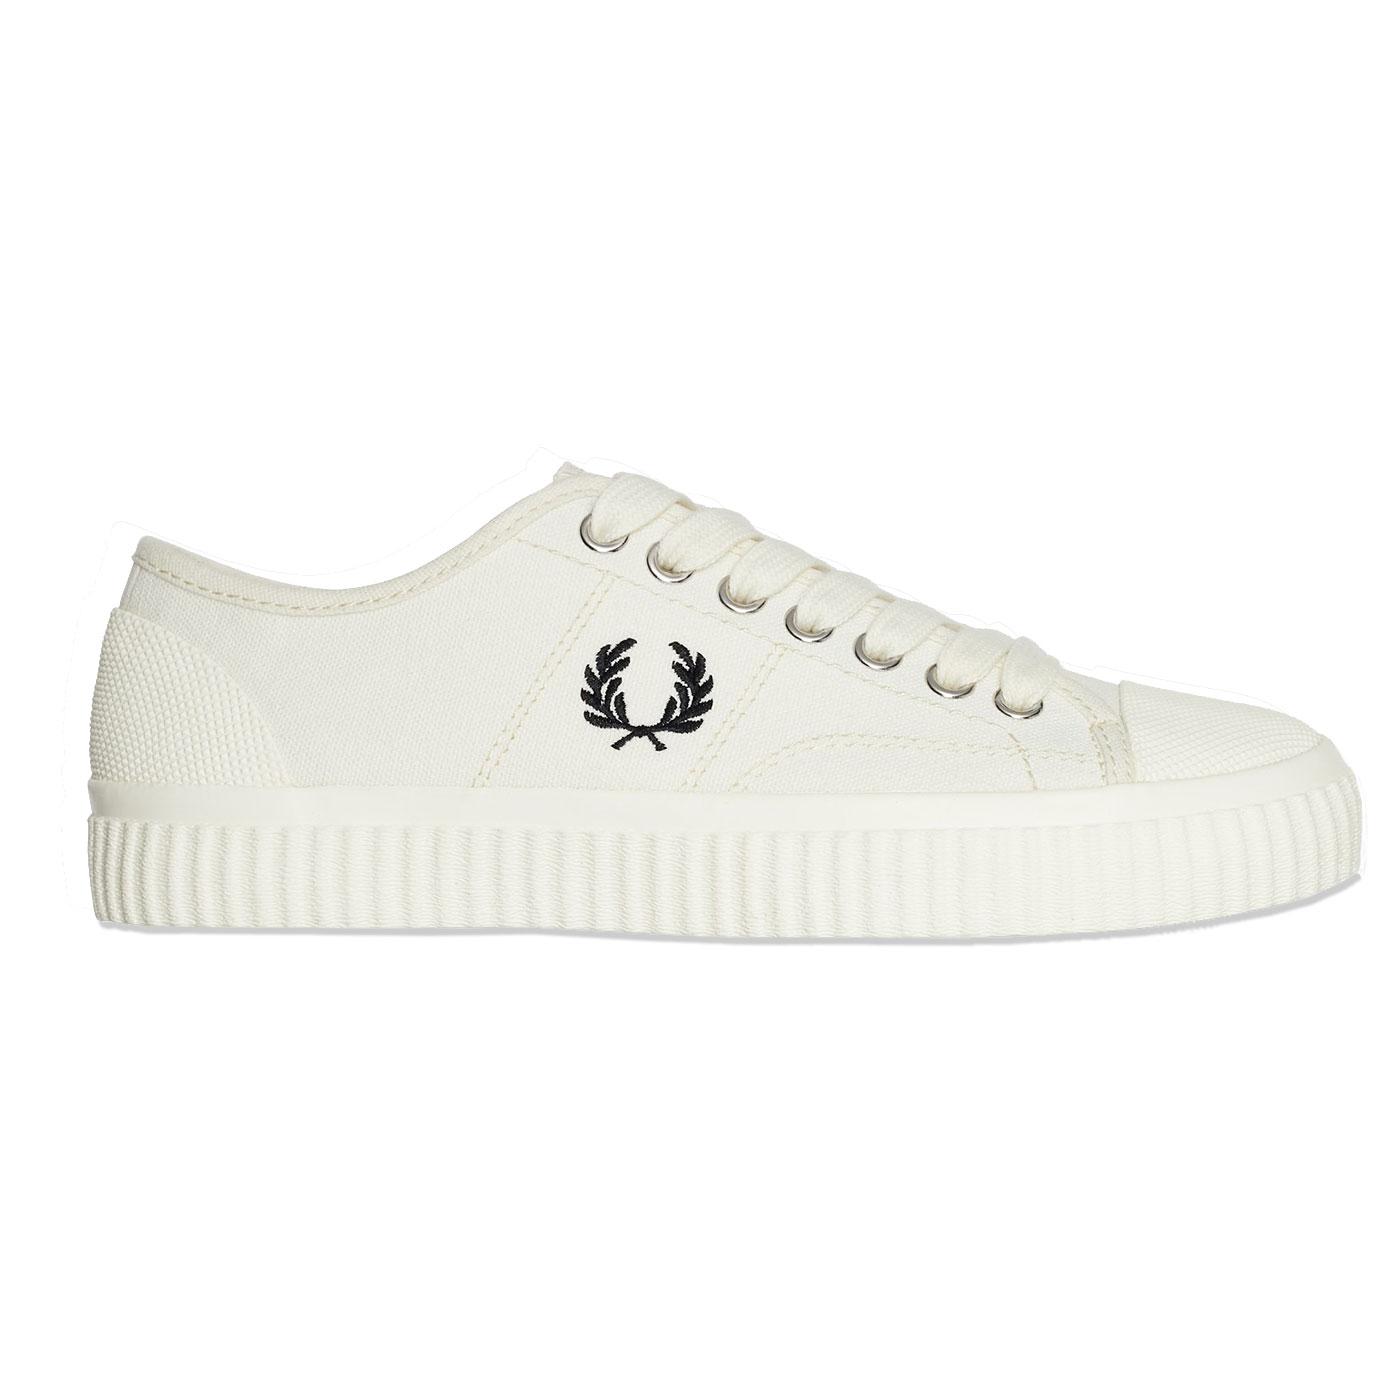 Hughes Low FRED PERRY Men's Retro Canvas Trainers